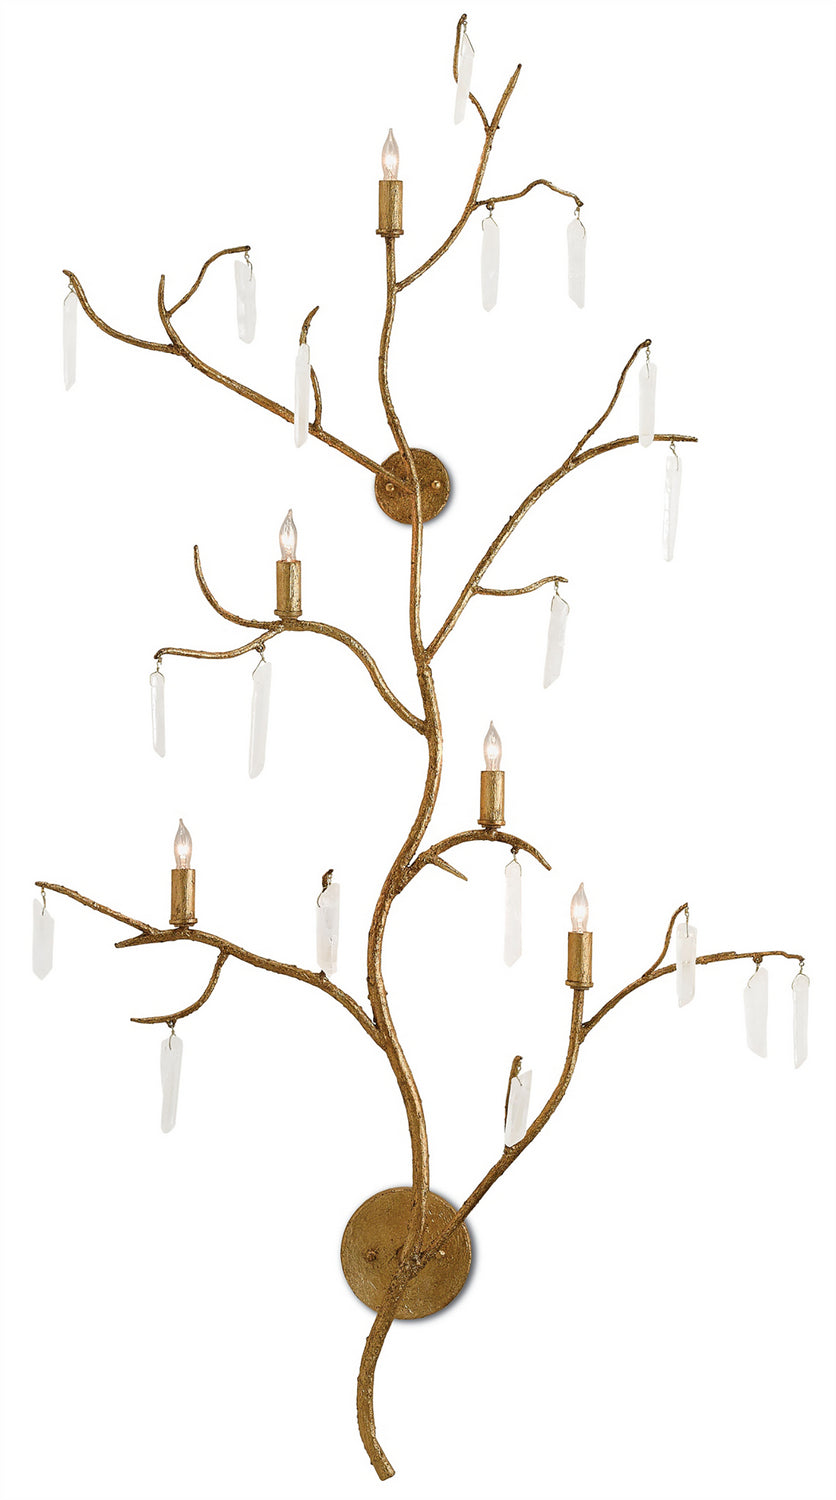 Five Light Wall Sconce from the Aviva Stanoff collection in Washed Lucerne Gold/Natural finish